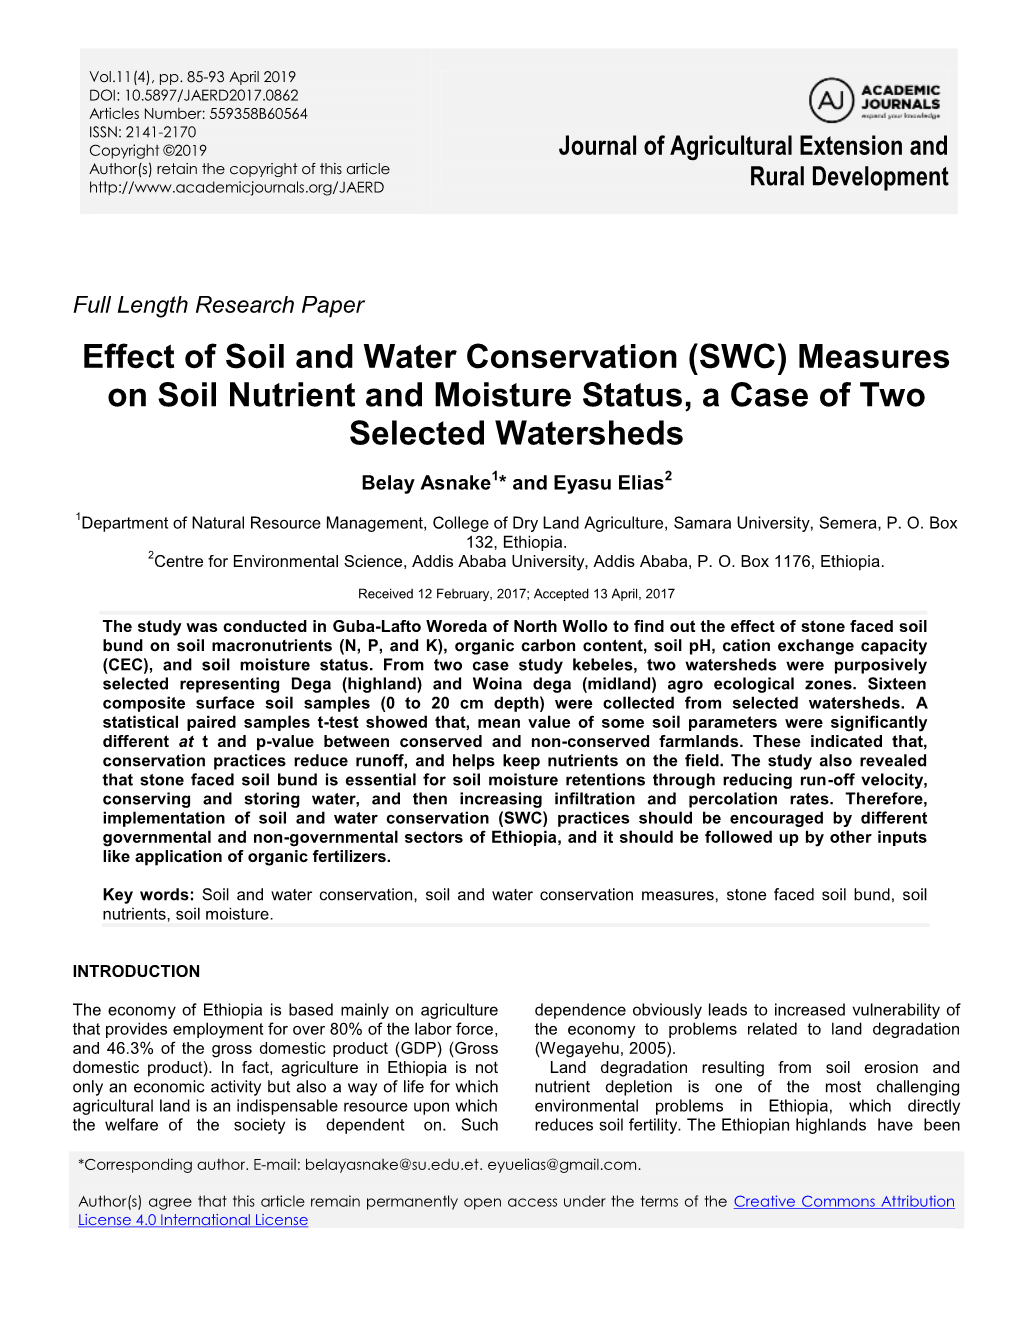 Effect of Stone Faced Soil Bund on Soil Nutrient and Moisture Status In